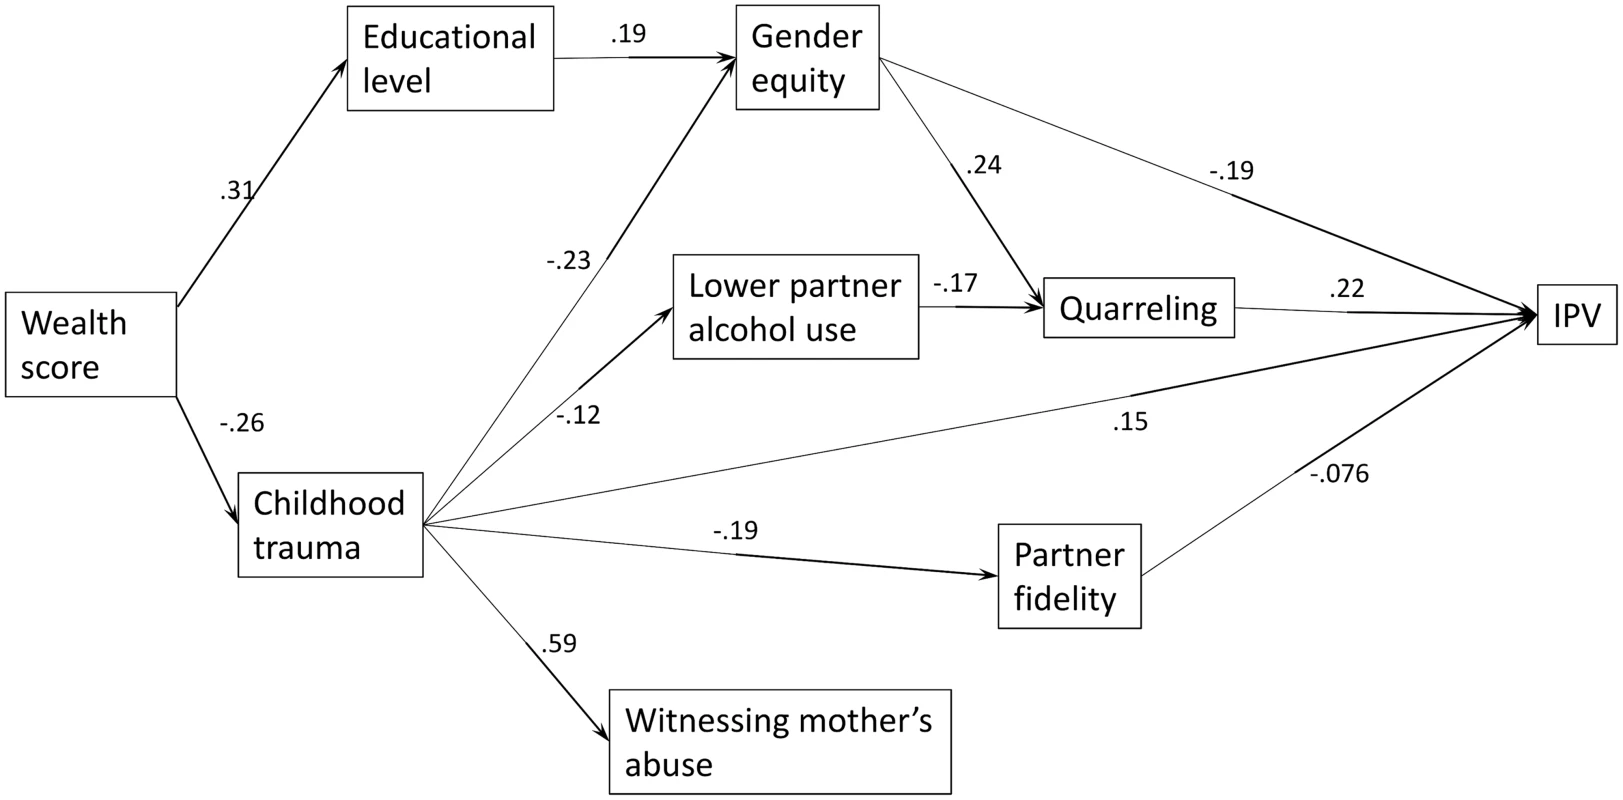 Final structural model of final factors influencing women’s experience of intimate partner violence (IPV) (standardized path coefficients [only statistically significant paths shown]).